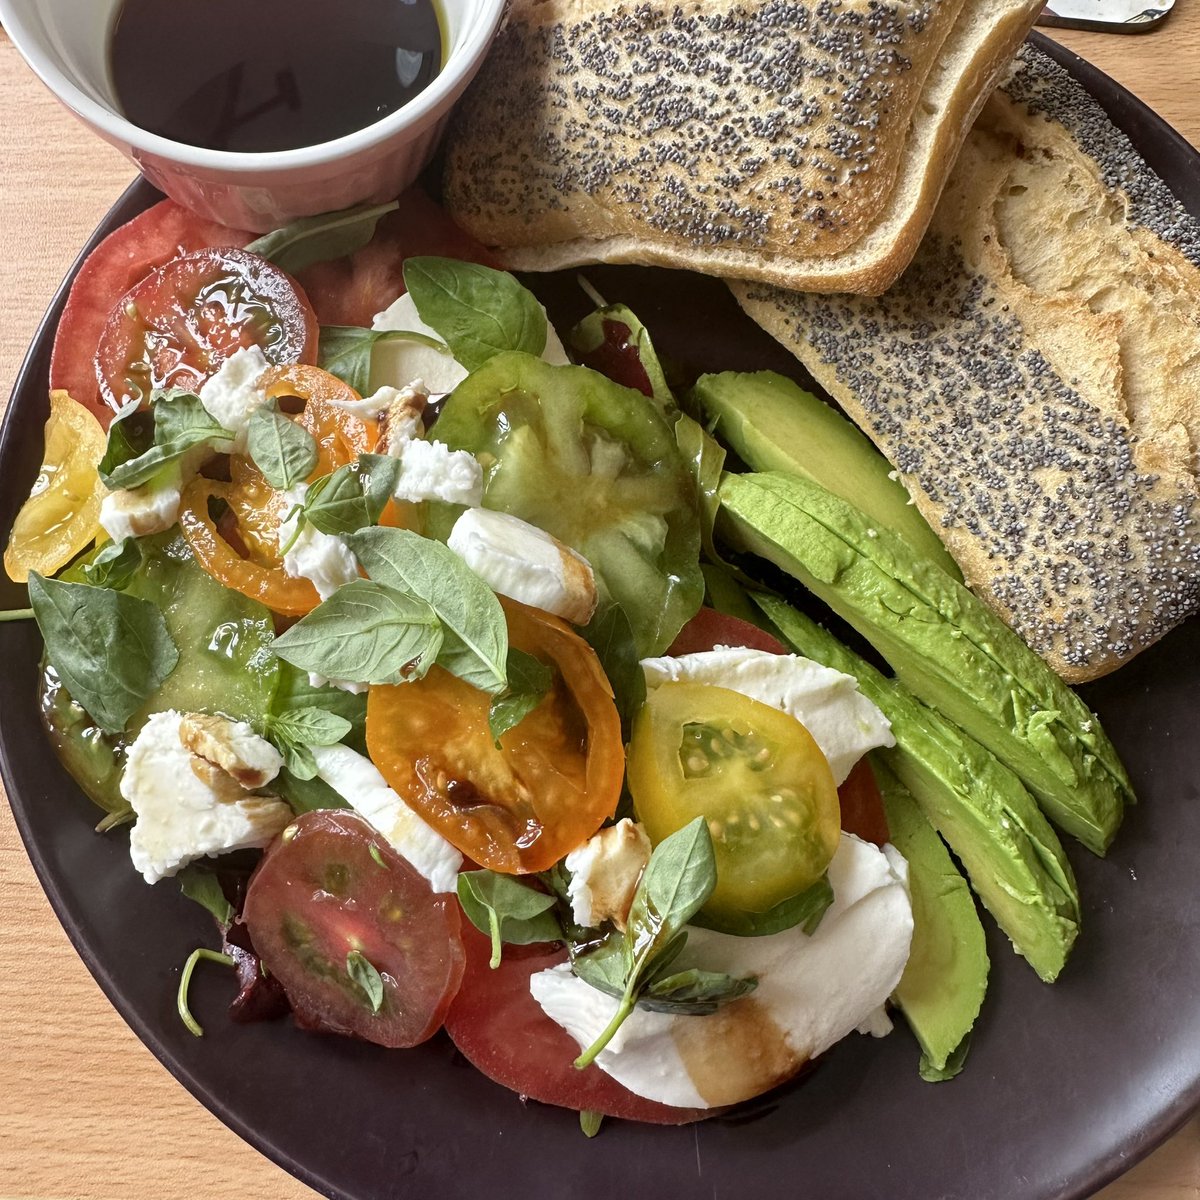 I’m in heaven! My first @iowtomatoes heritage tomatoes for the year arrived yesterday so today’s lunch is a caprese salad on a bed of dressed rocket & baby leaf salad with avocado & baked-at-home poppy seed ciabatta with EVO & balsamic to dip. #CookingTwitter #Tomatoes #Lunch